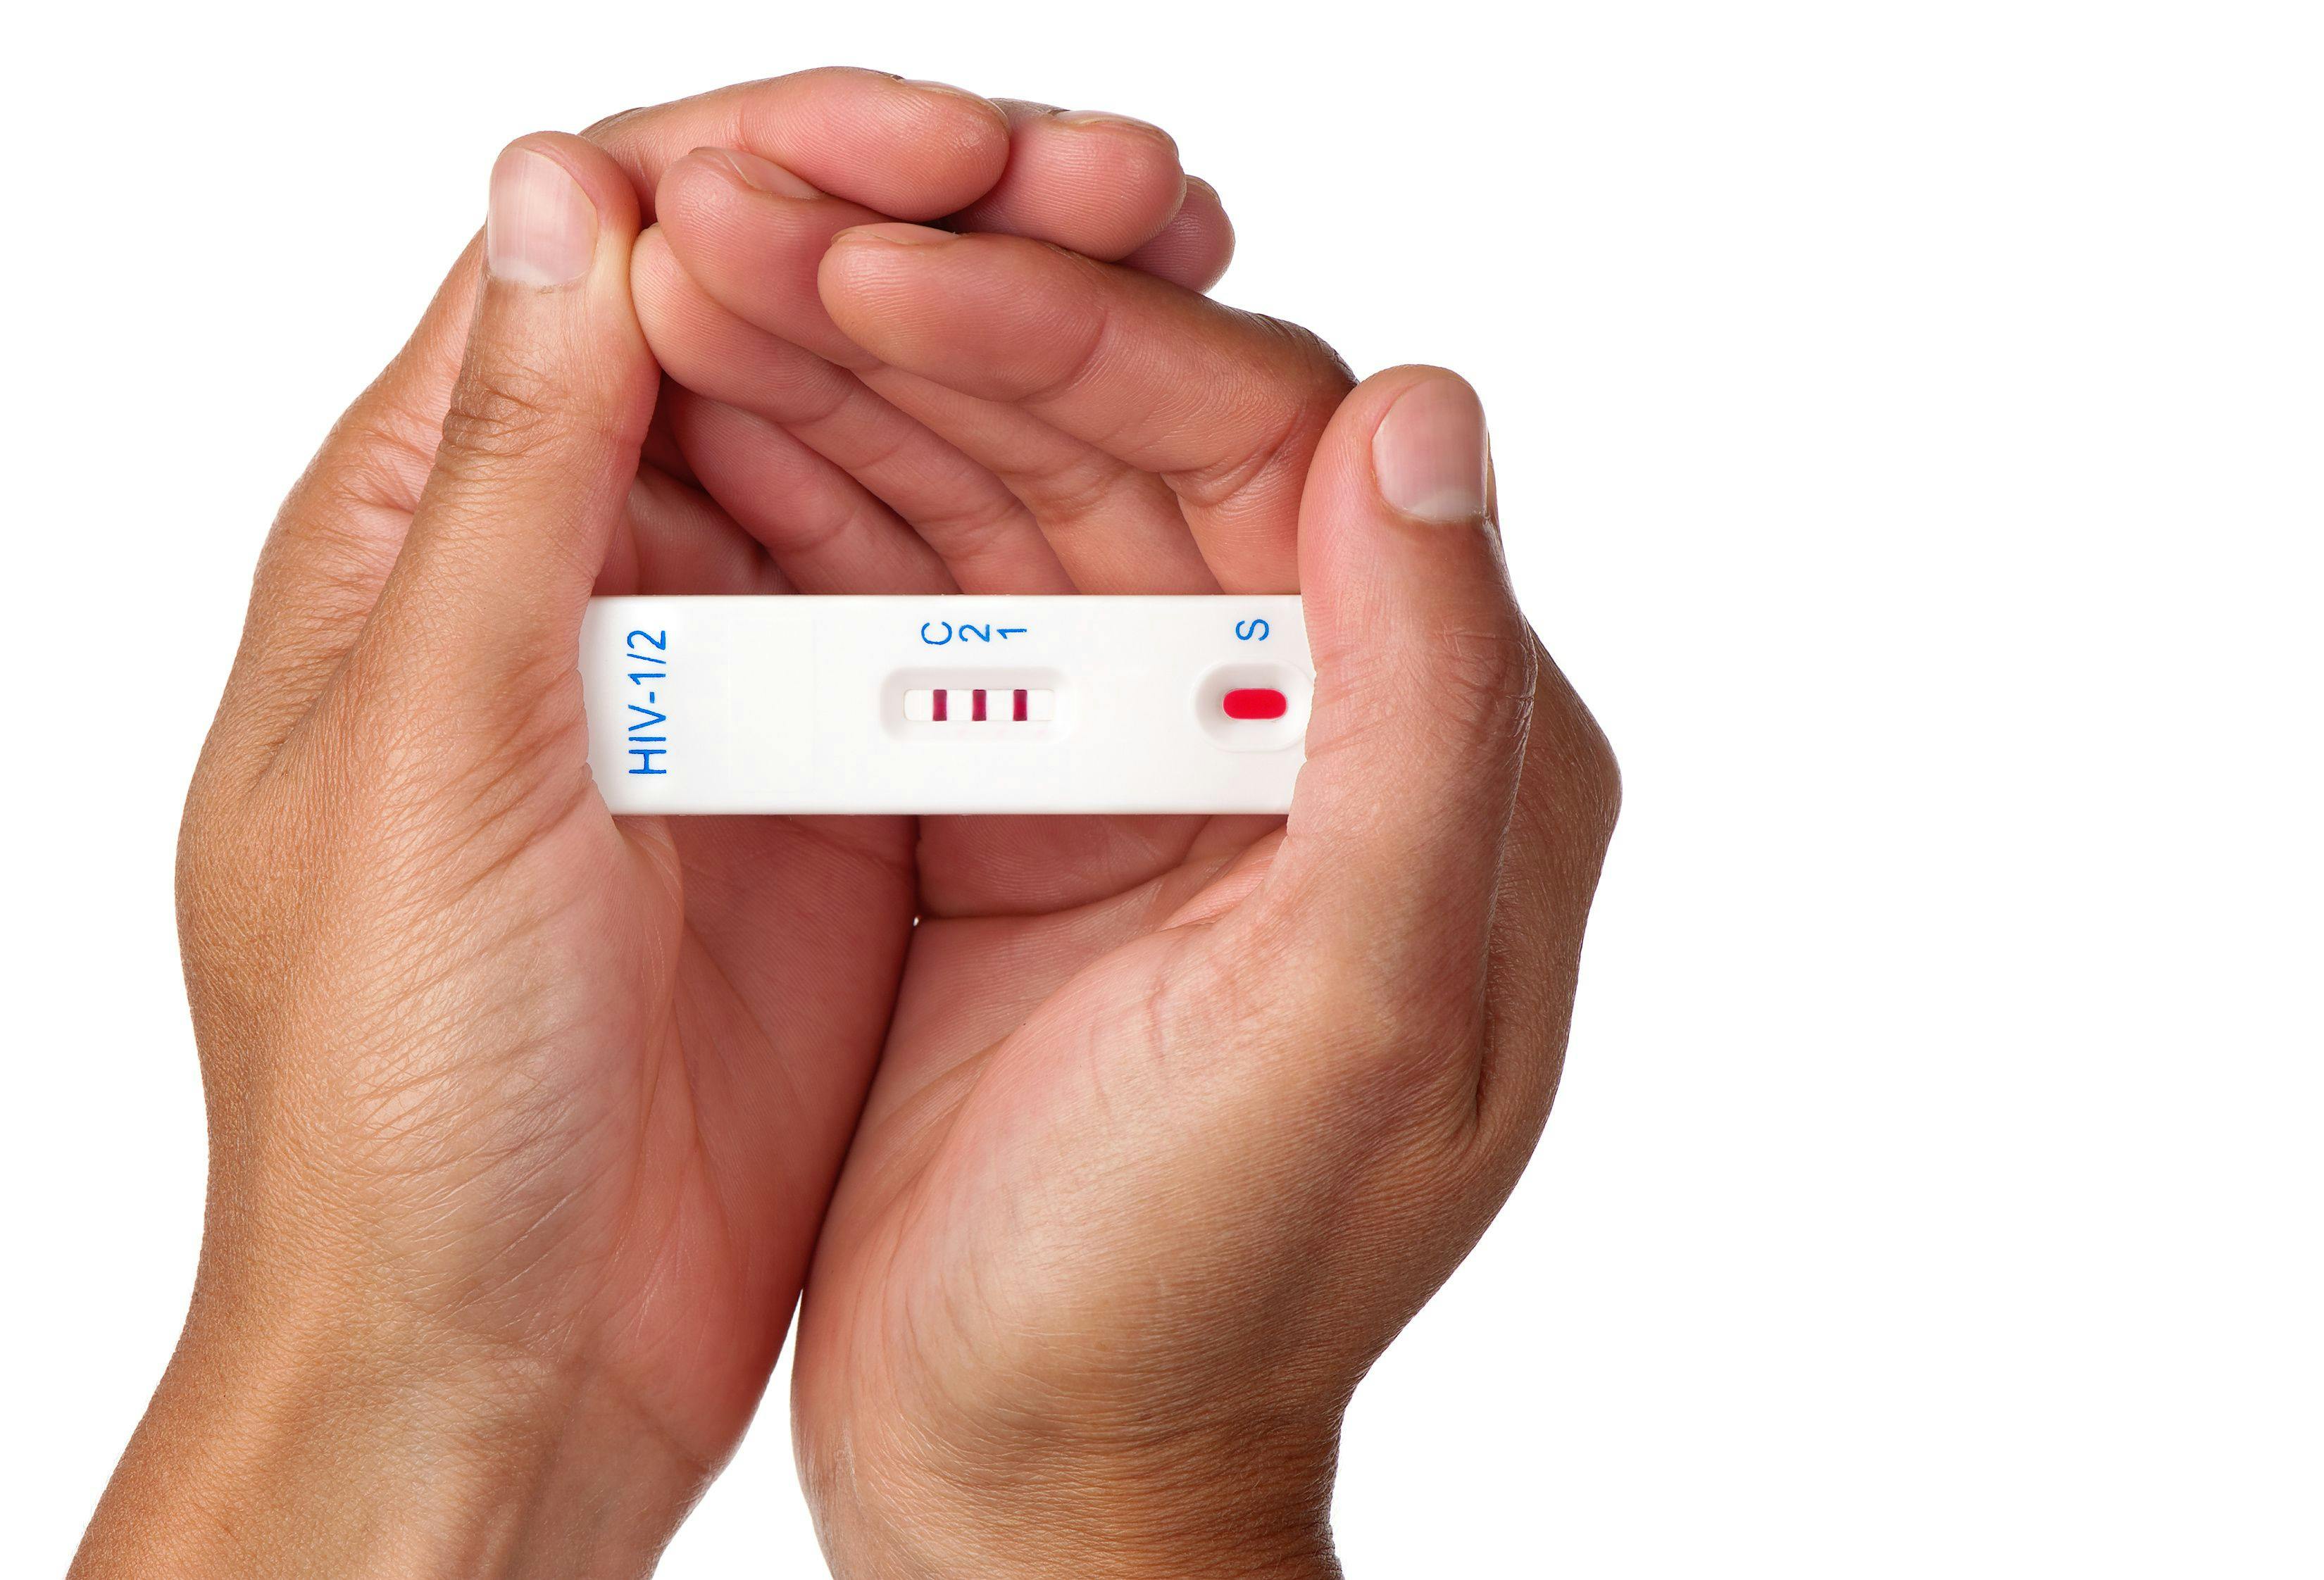 Counsel About the Appropriate Use of At-Home HIV Tests